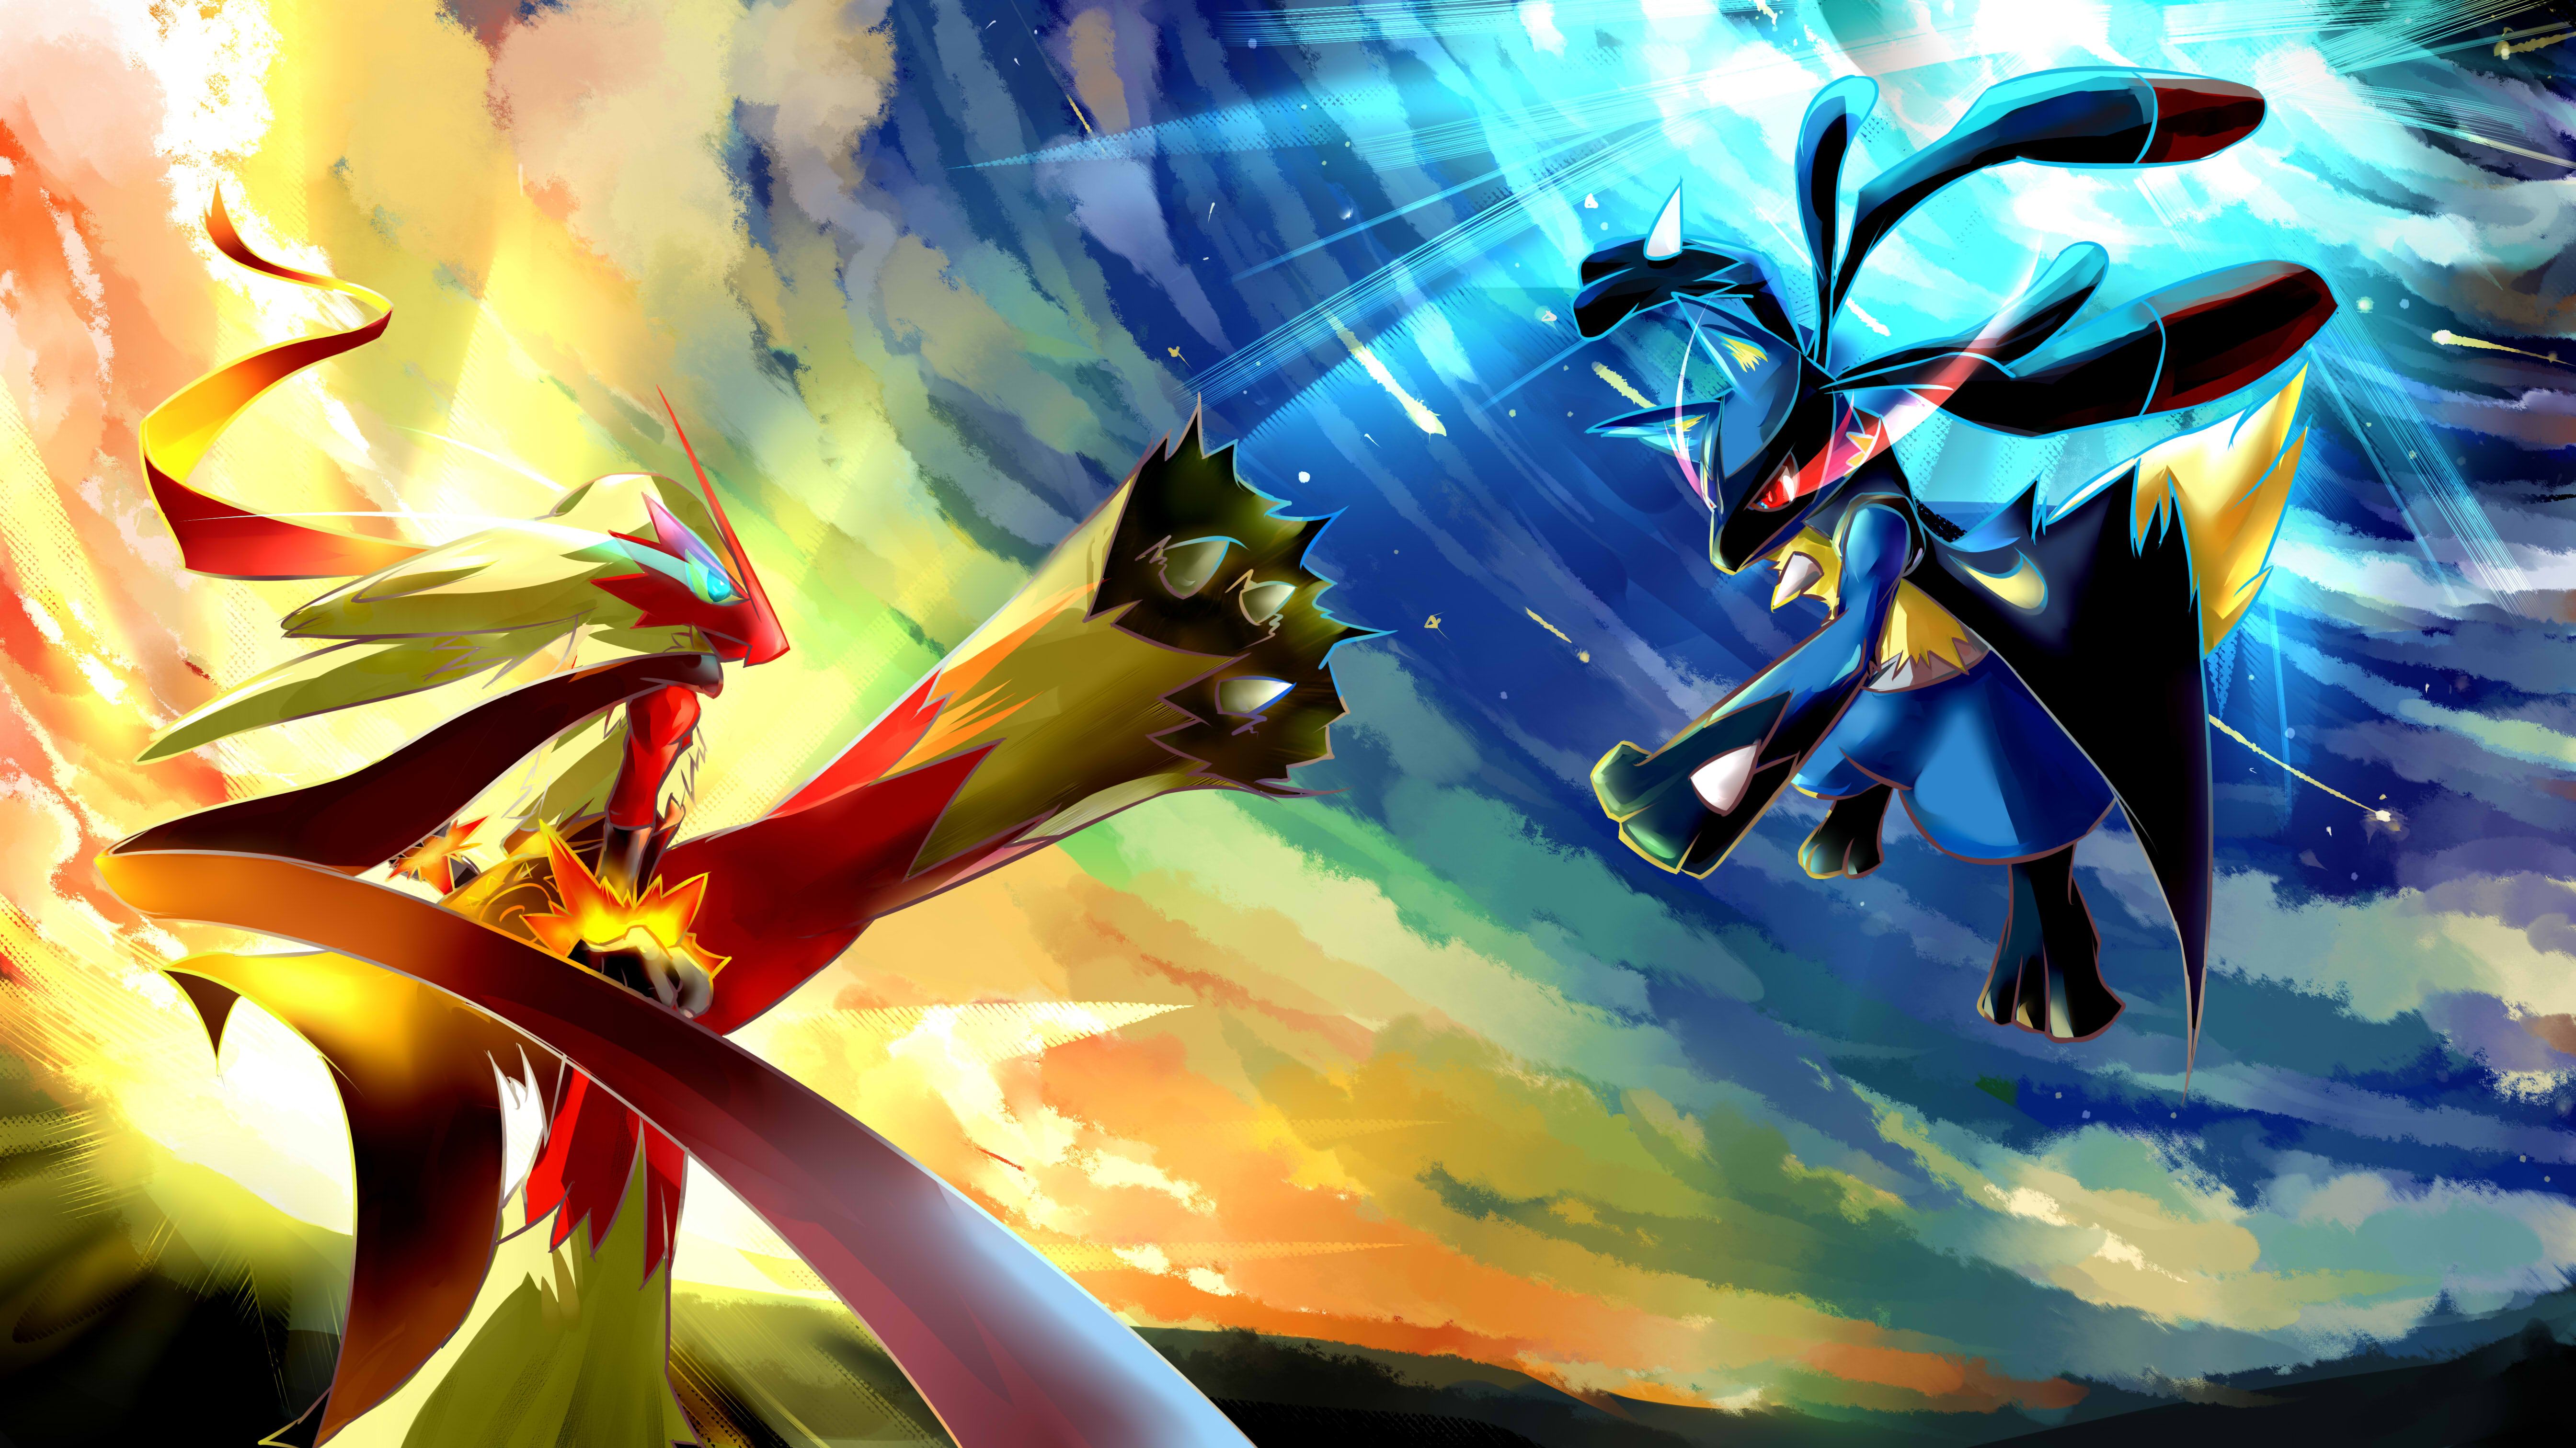 4 Lucario (Pokémon) HD Wallpapers | Backgrounds - Wallpaper Abyss